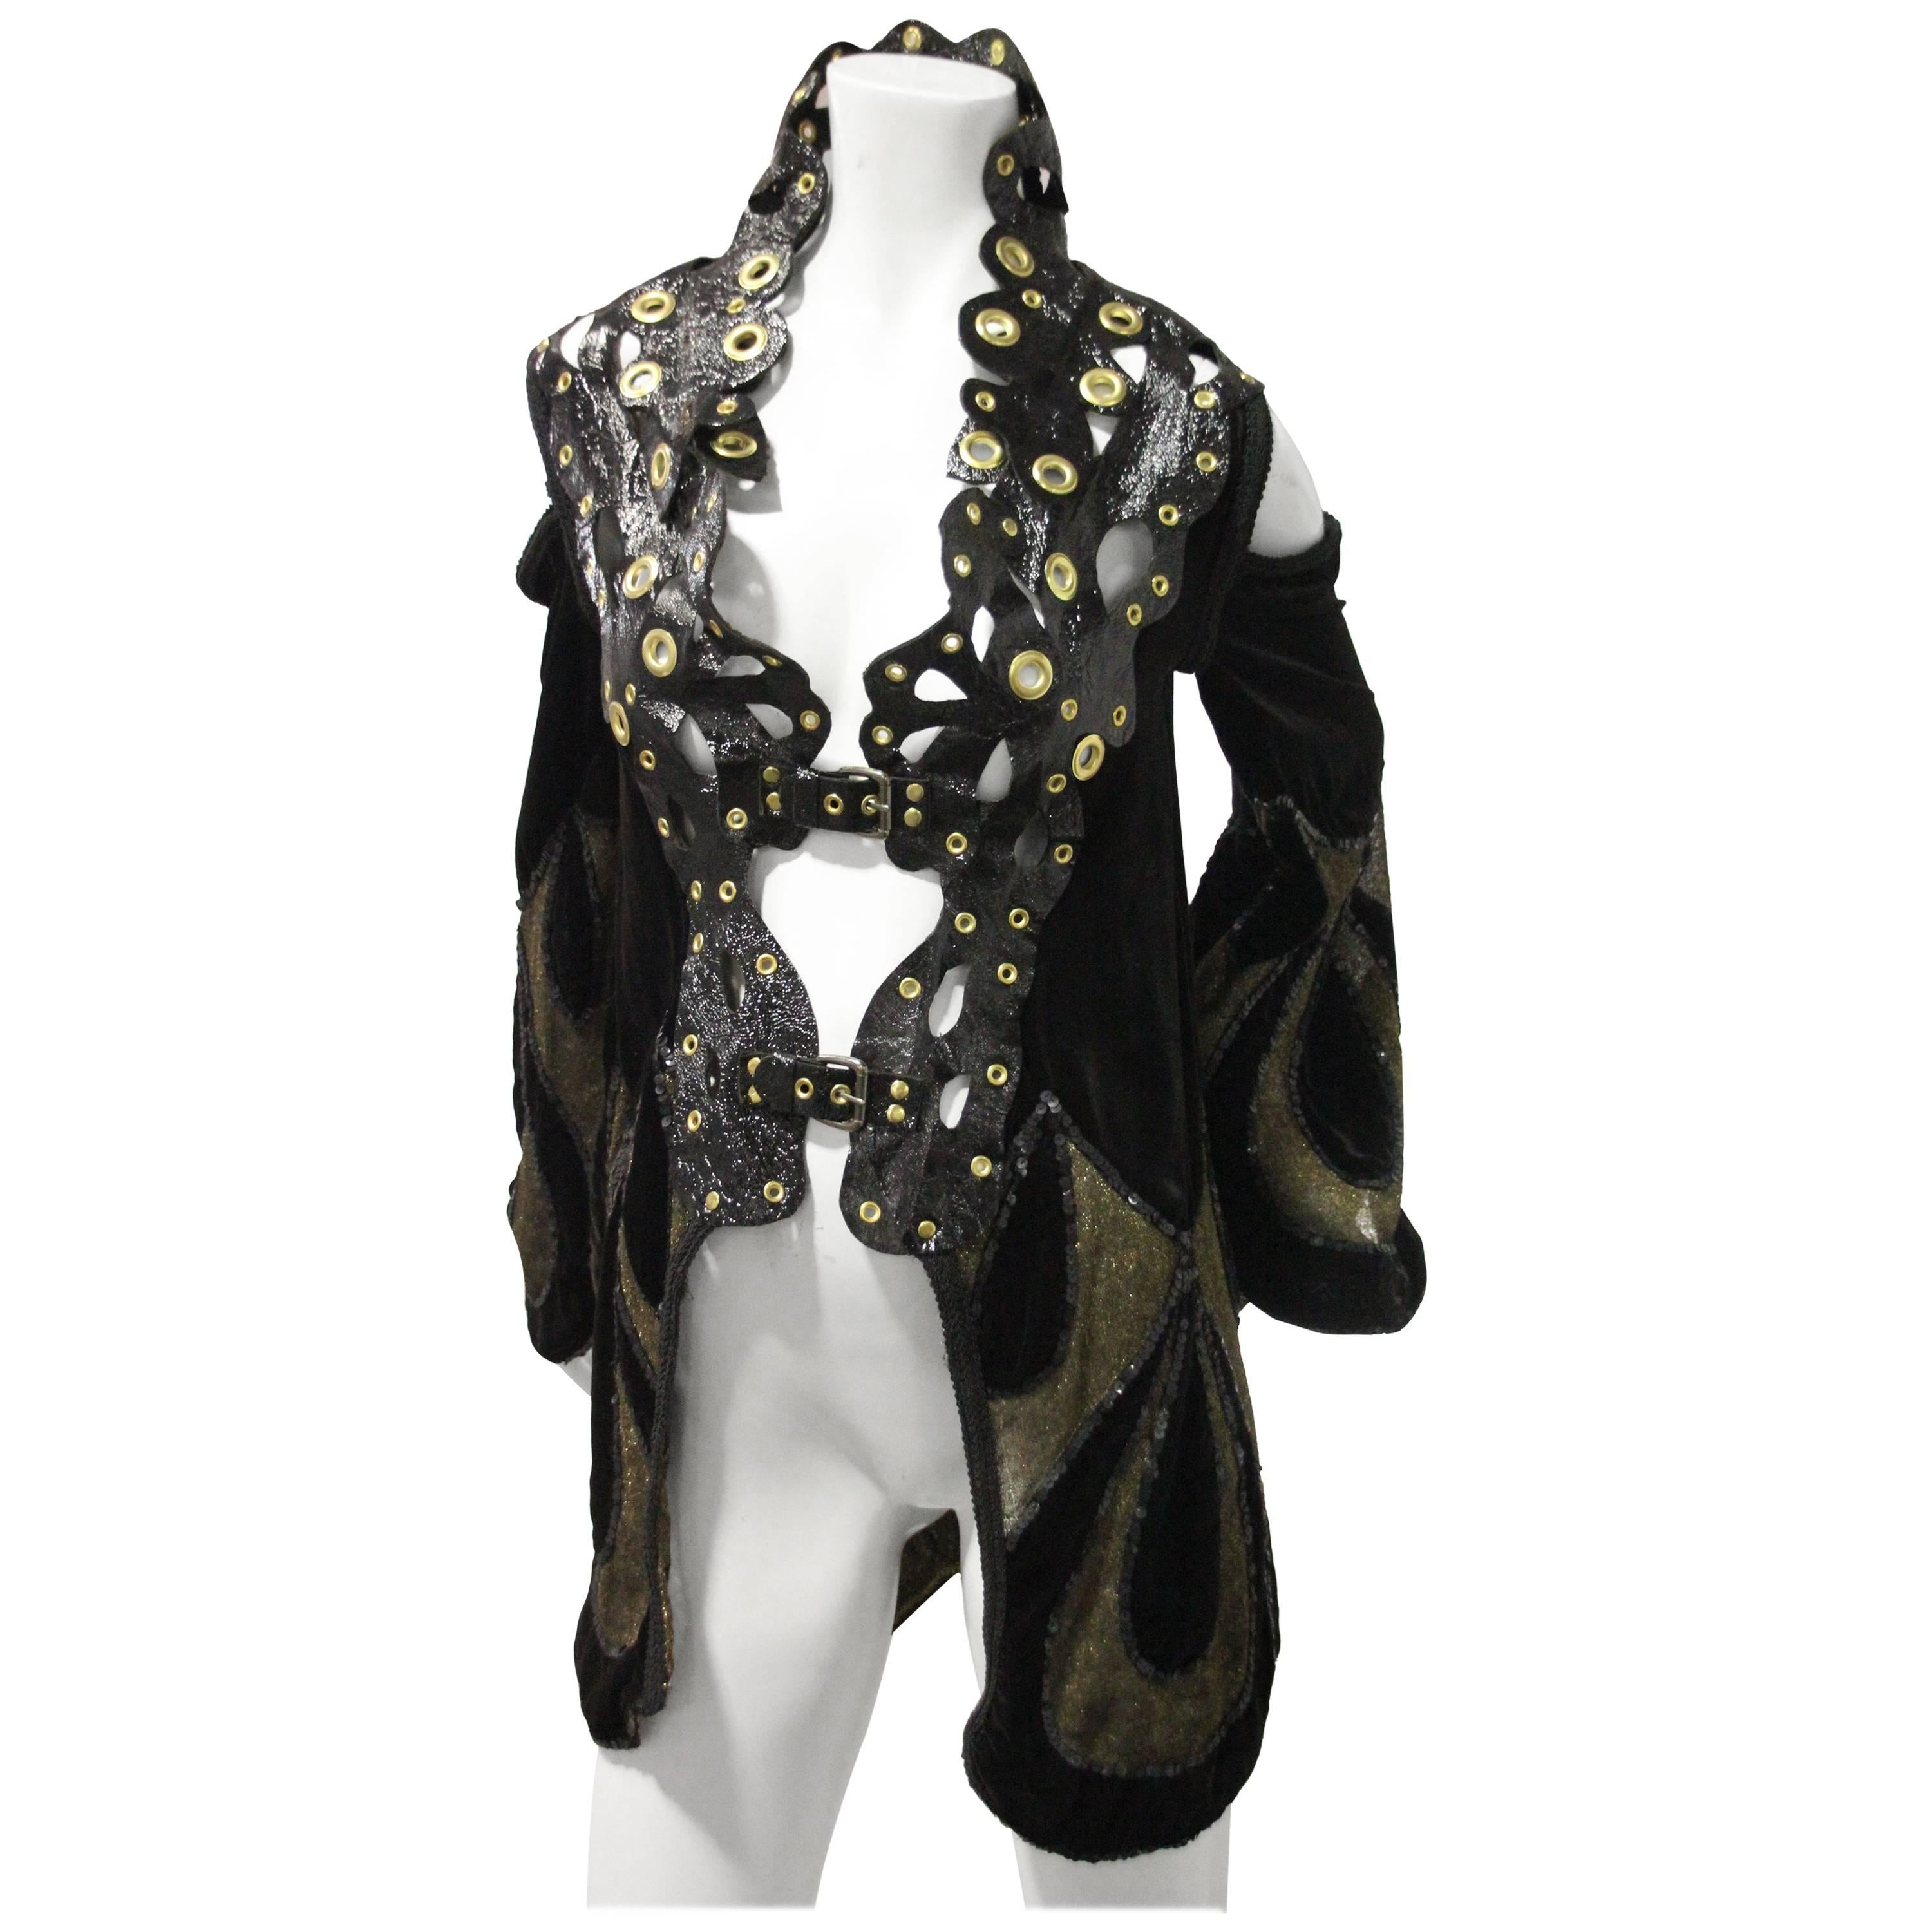 Avant Garde Reconstructed Art Deco Opera Coat with Patent Leather High Collar